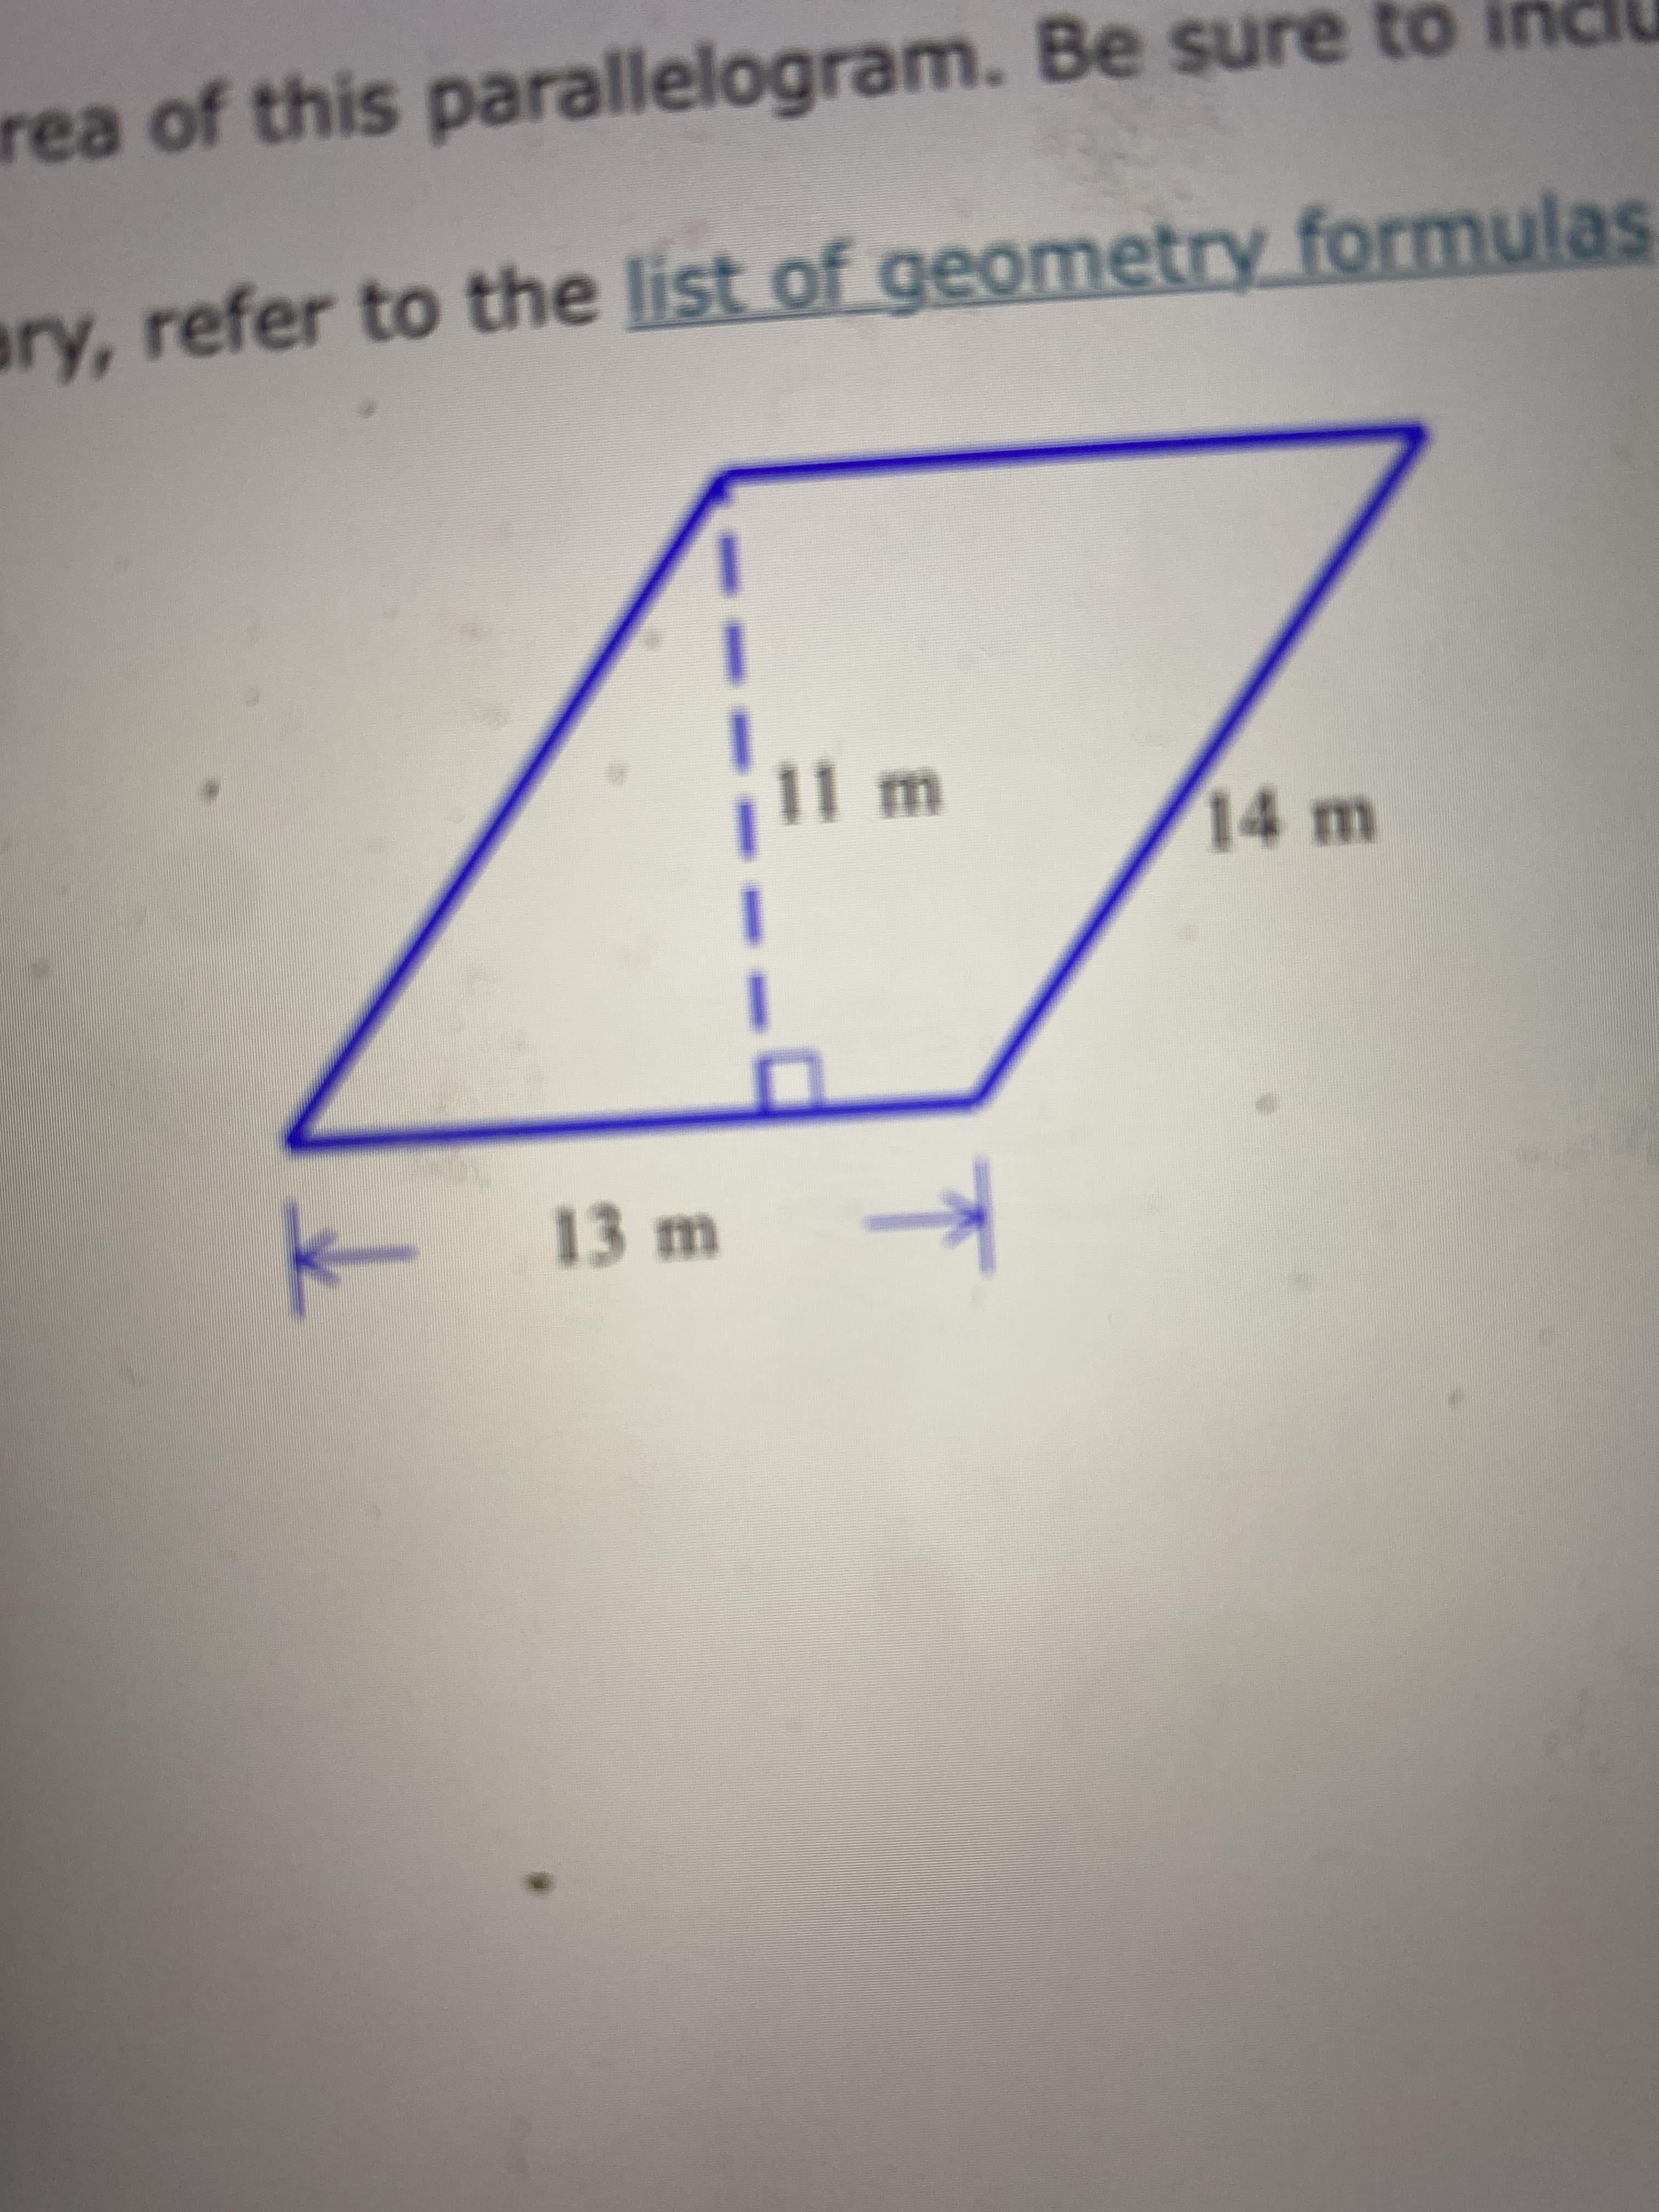 rea of this parallelogram. Be sure to
ary, refer to the list of geometry formulas
14m
13 m
